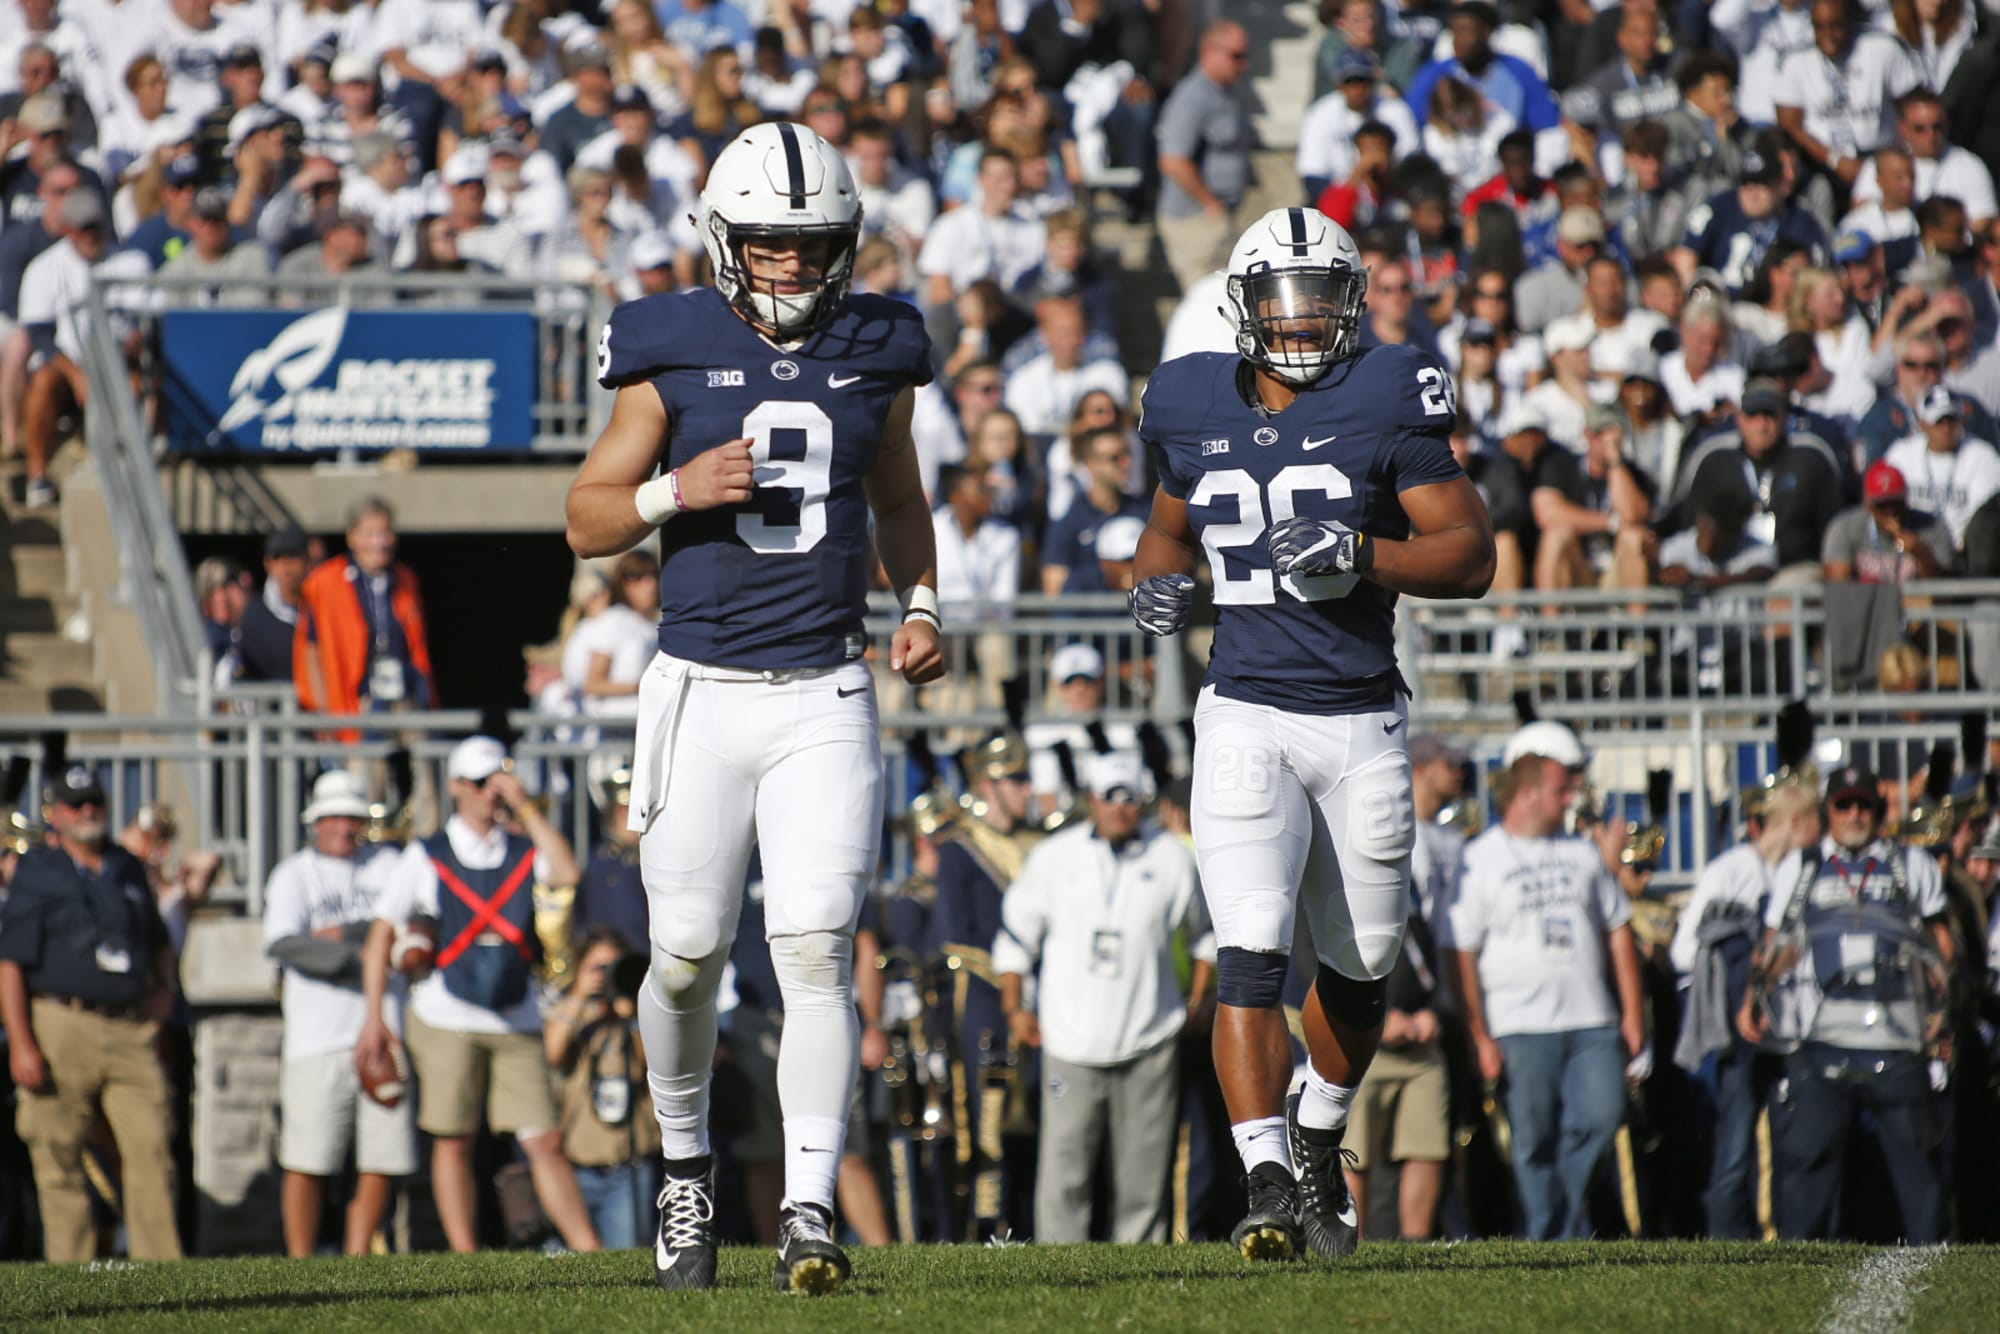 Penn State Football ranking the best offensive players of the James